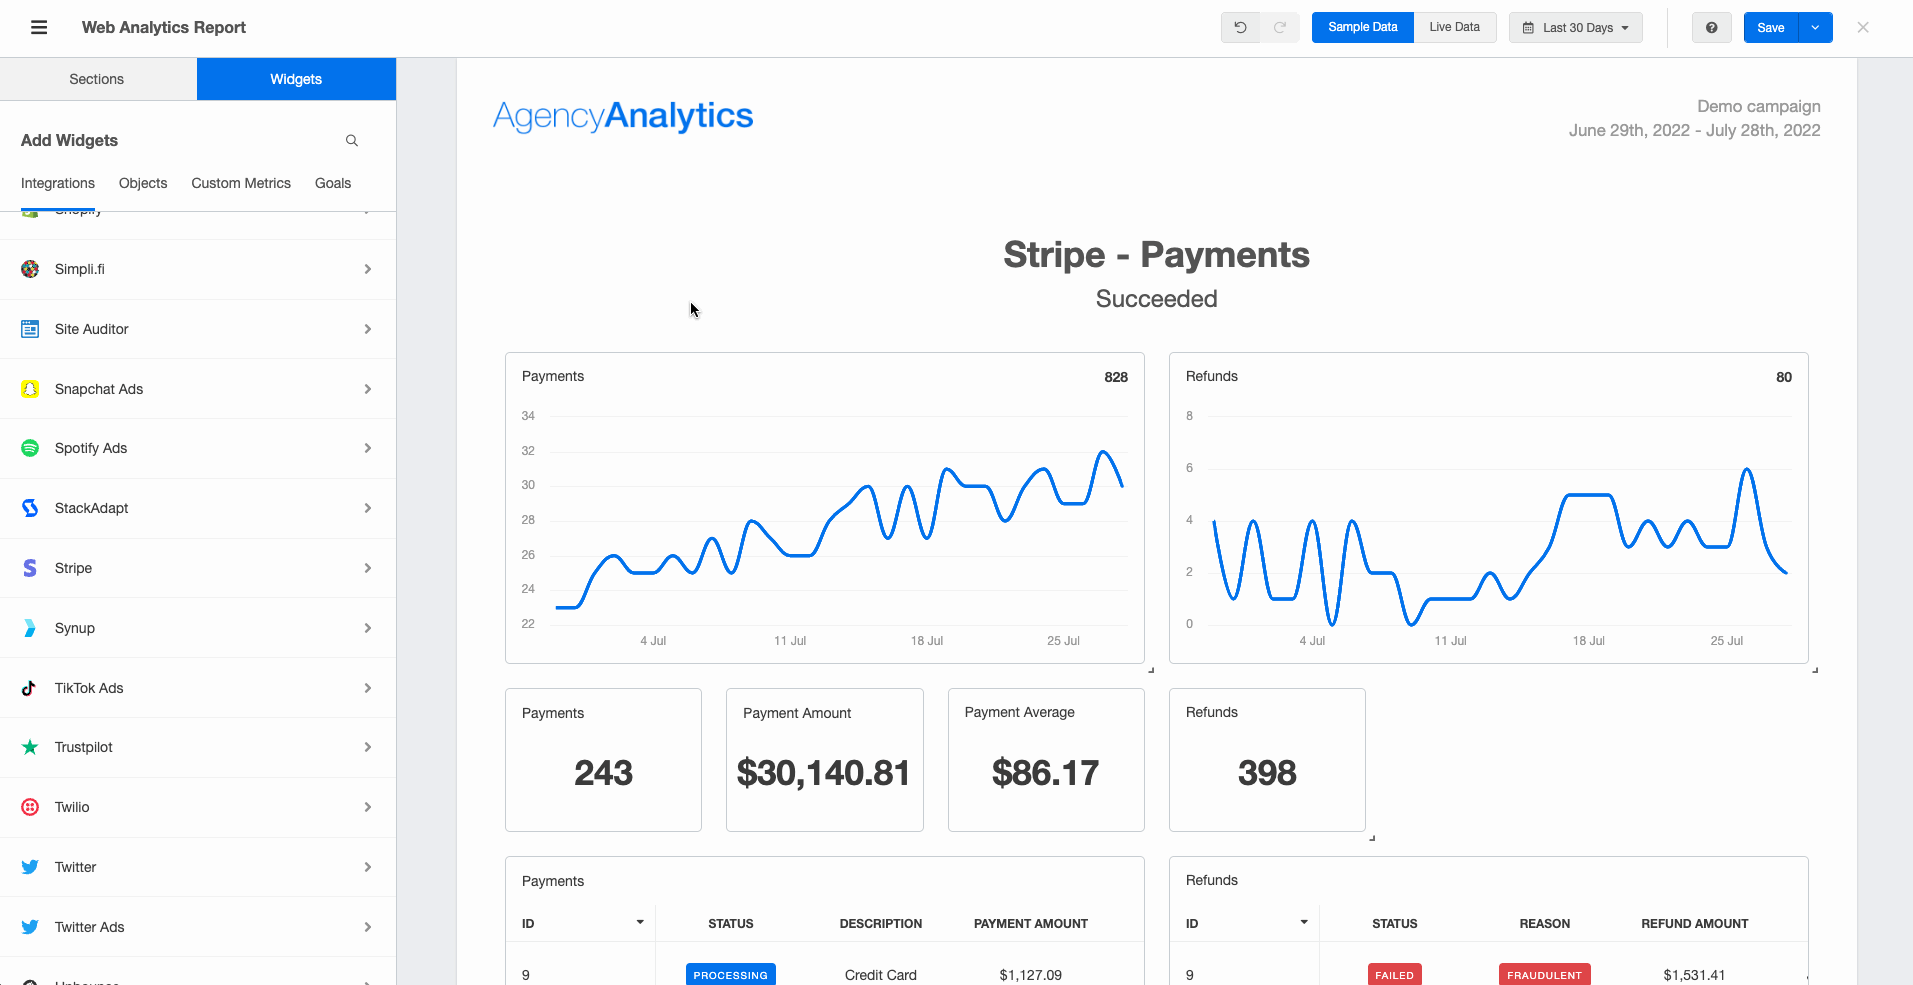 An example of how Stripe reporting works in AgencyAnalytics.